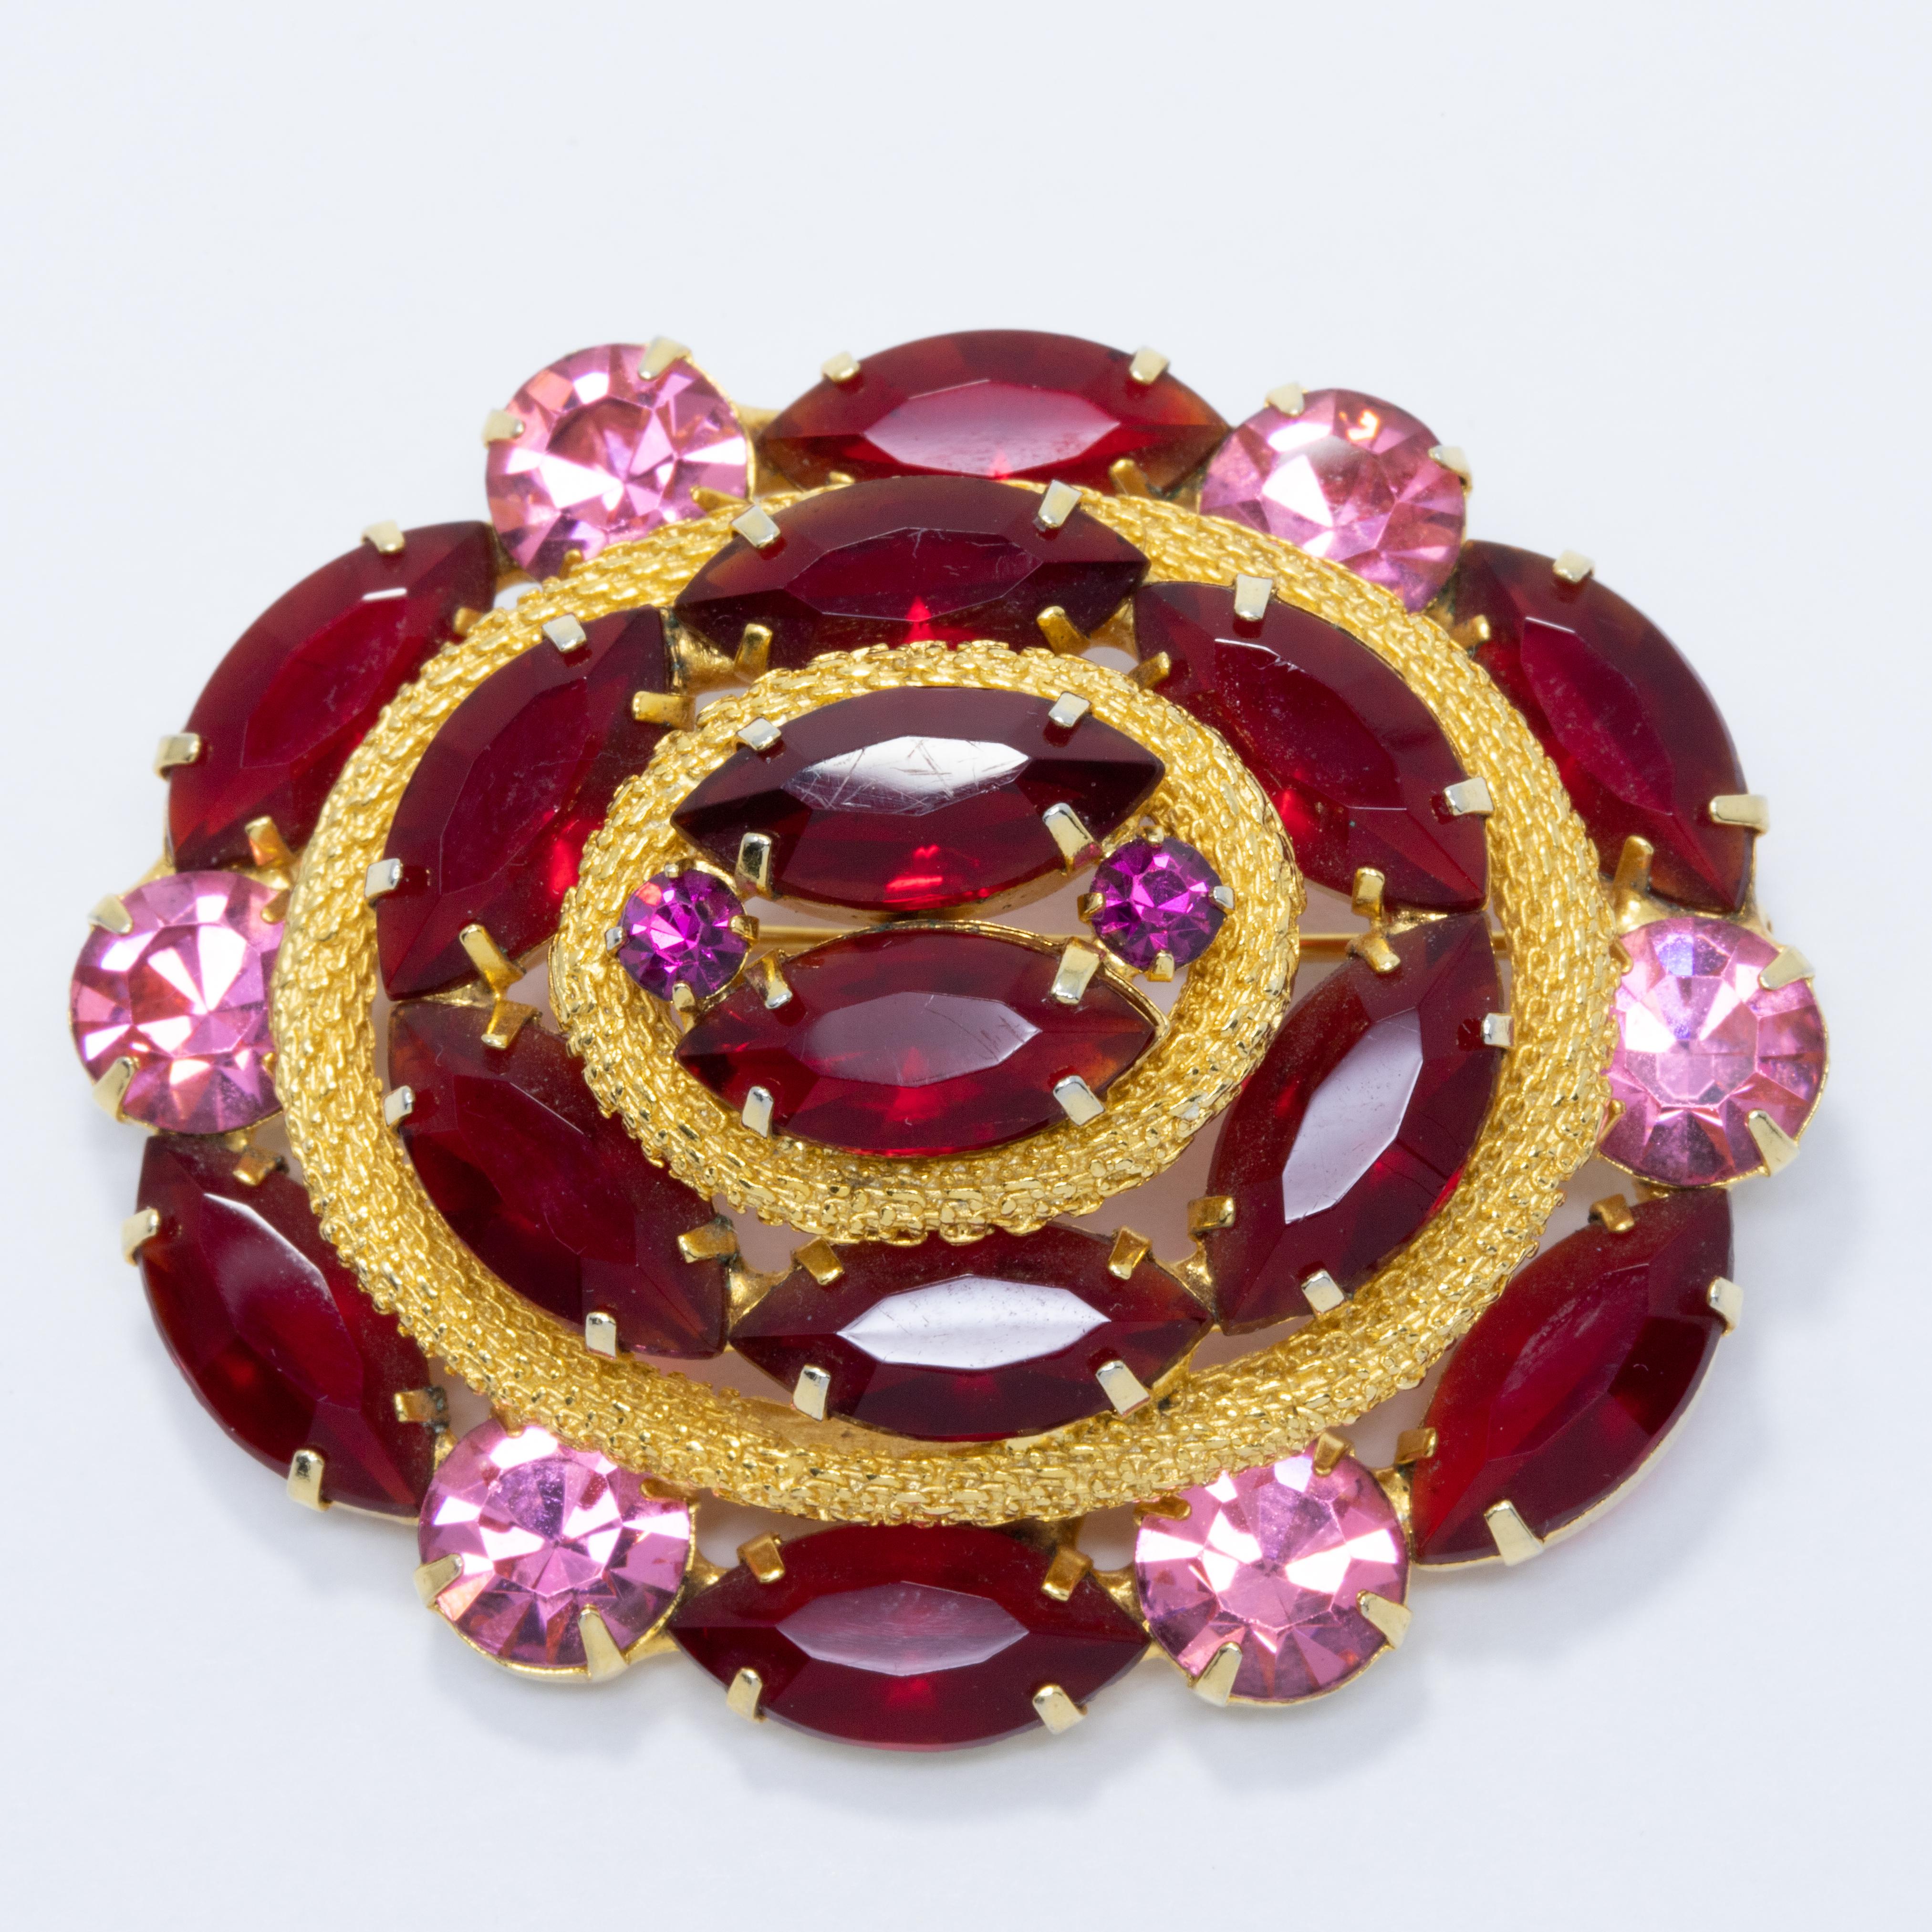 An extravagant set of clip on earrings and a brooch, decorated with open-back ruby and amethyst crystals and set in a gold-plated setting. Reminiscent of lavish Victorian styles, this set is sure to impress!

From vintage stock that has never been